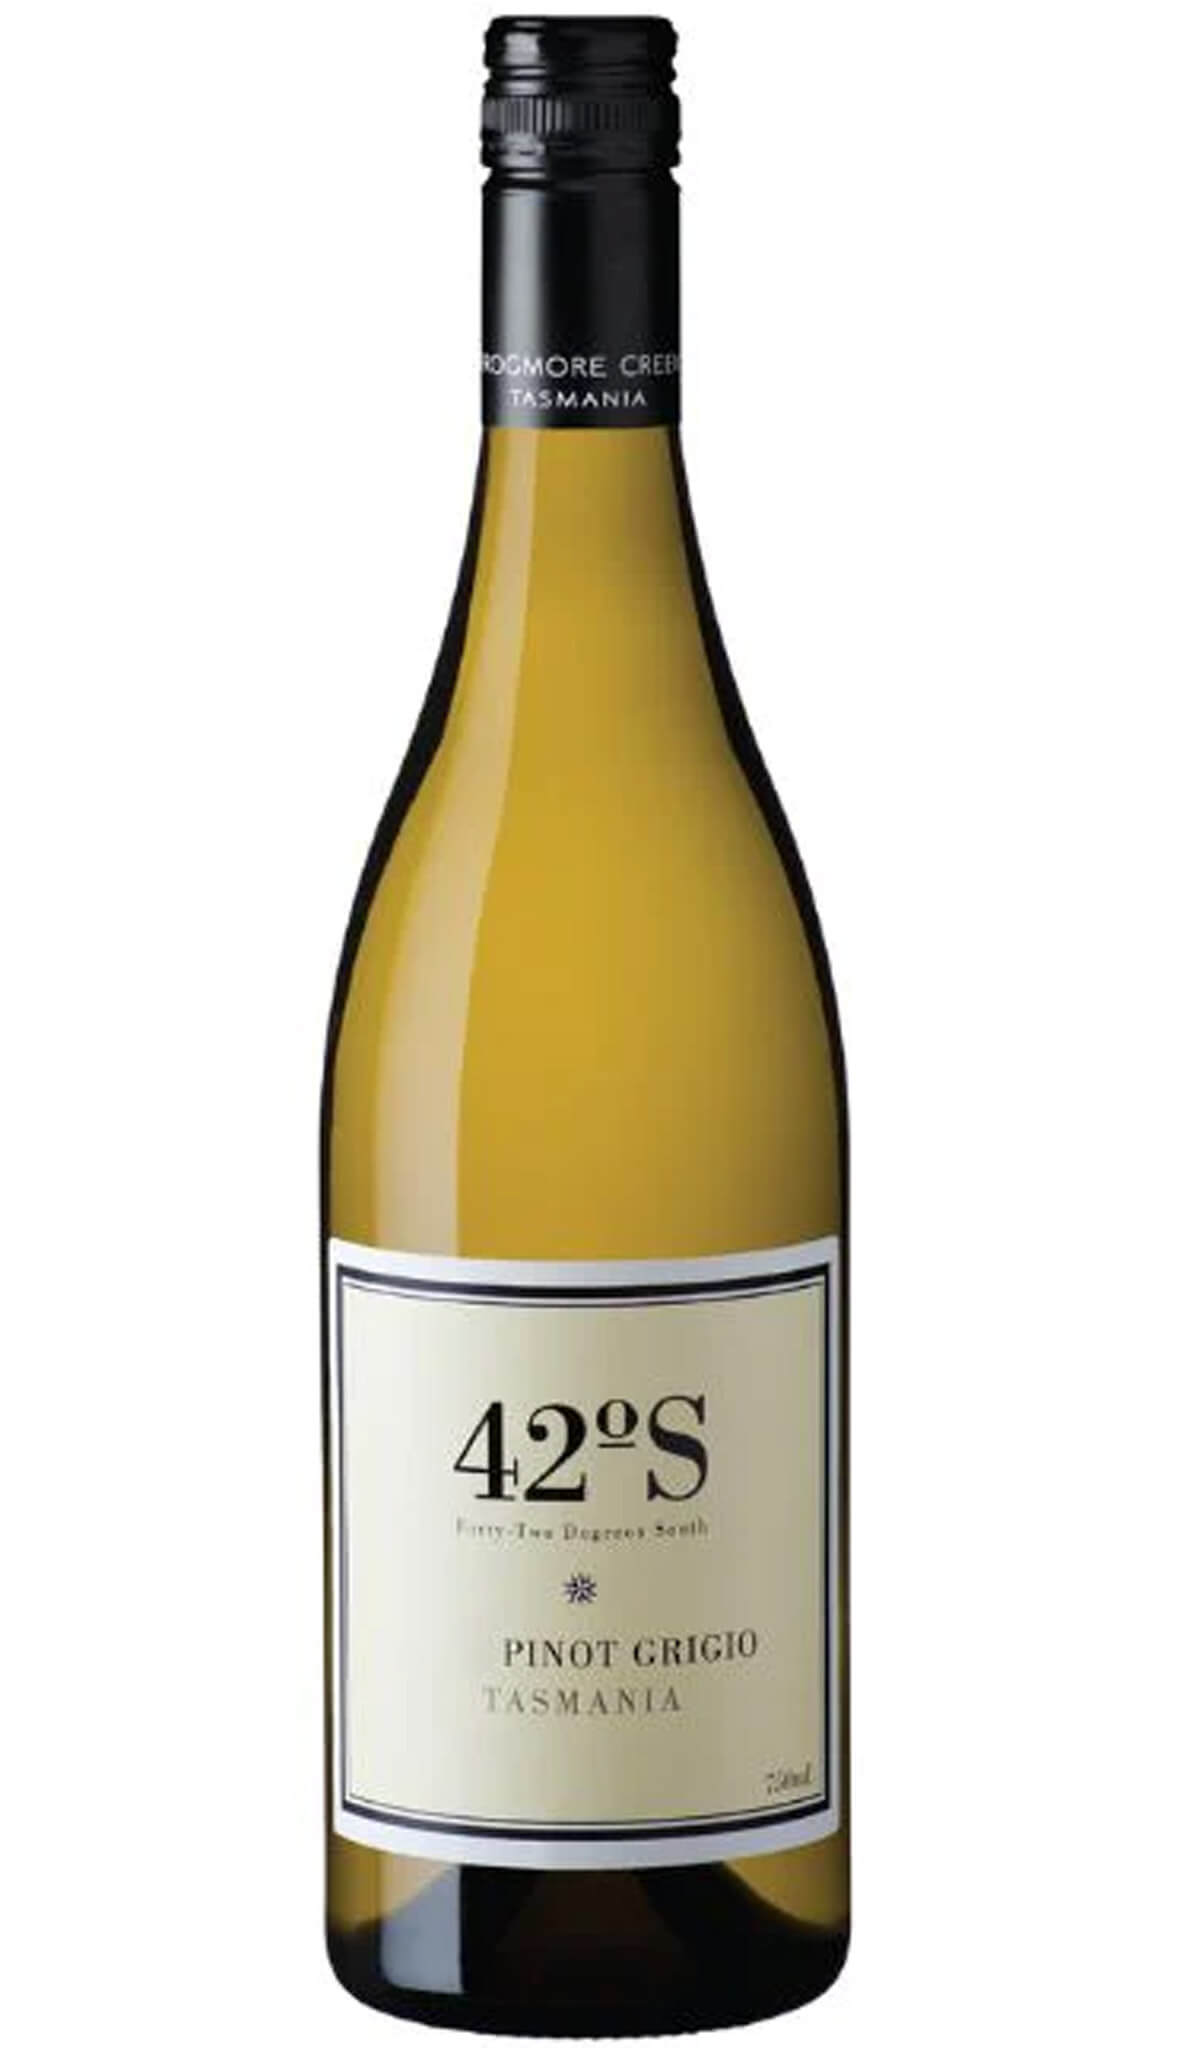 Find out more or buy 42 Degrees South Pinot Grigio 2023 (Tasmania) online at Wine Sellers Direct - Australia’s independent liquor specialists.